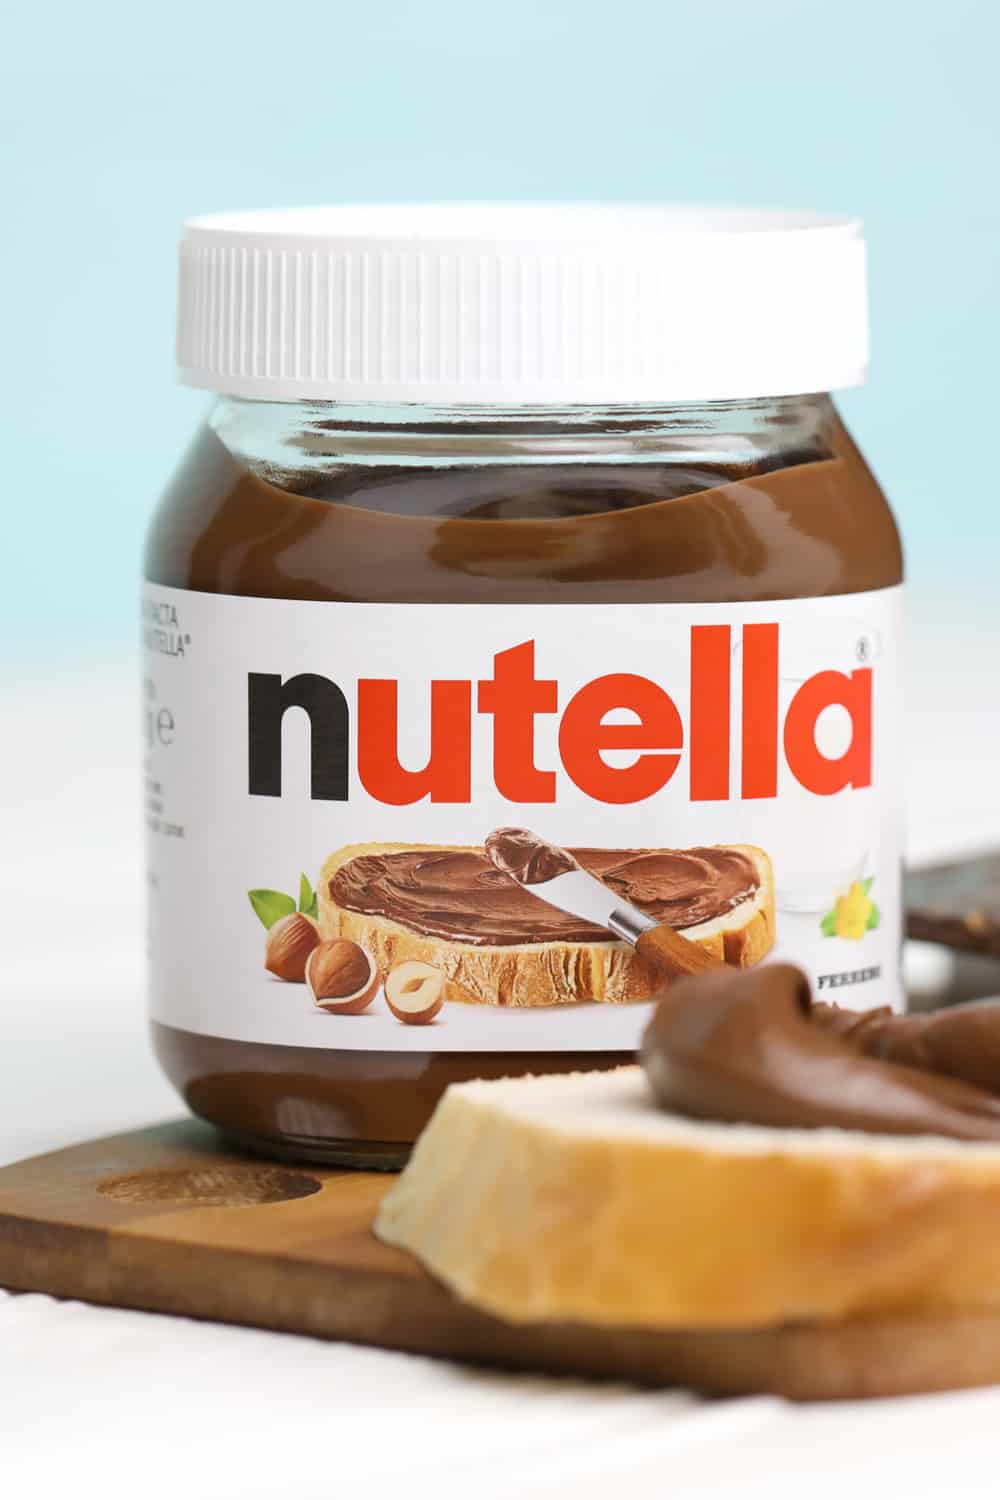 How to Tell if Nutella Has Gone Bad